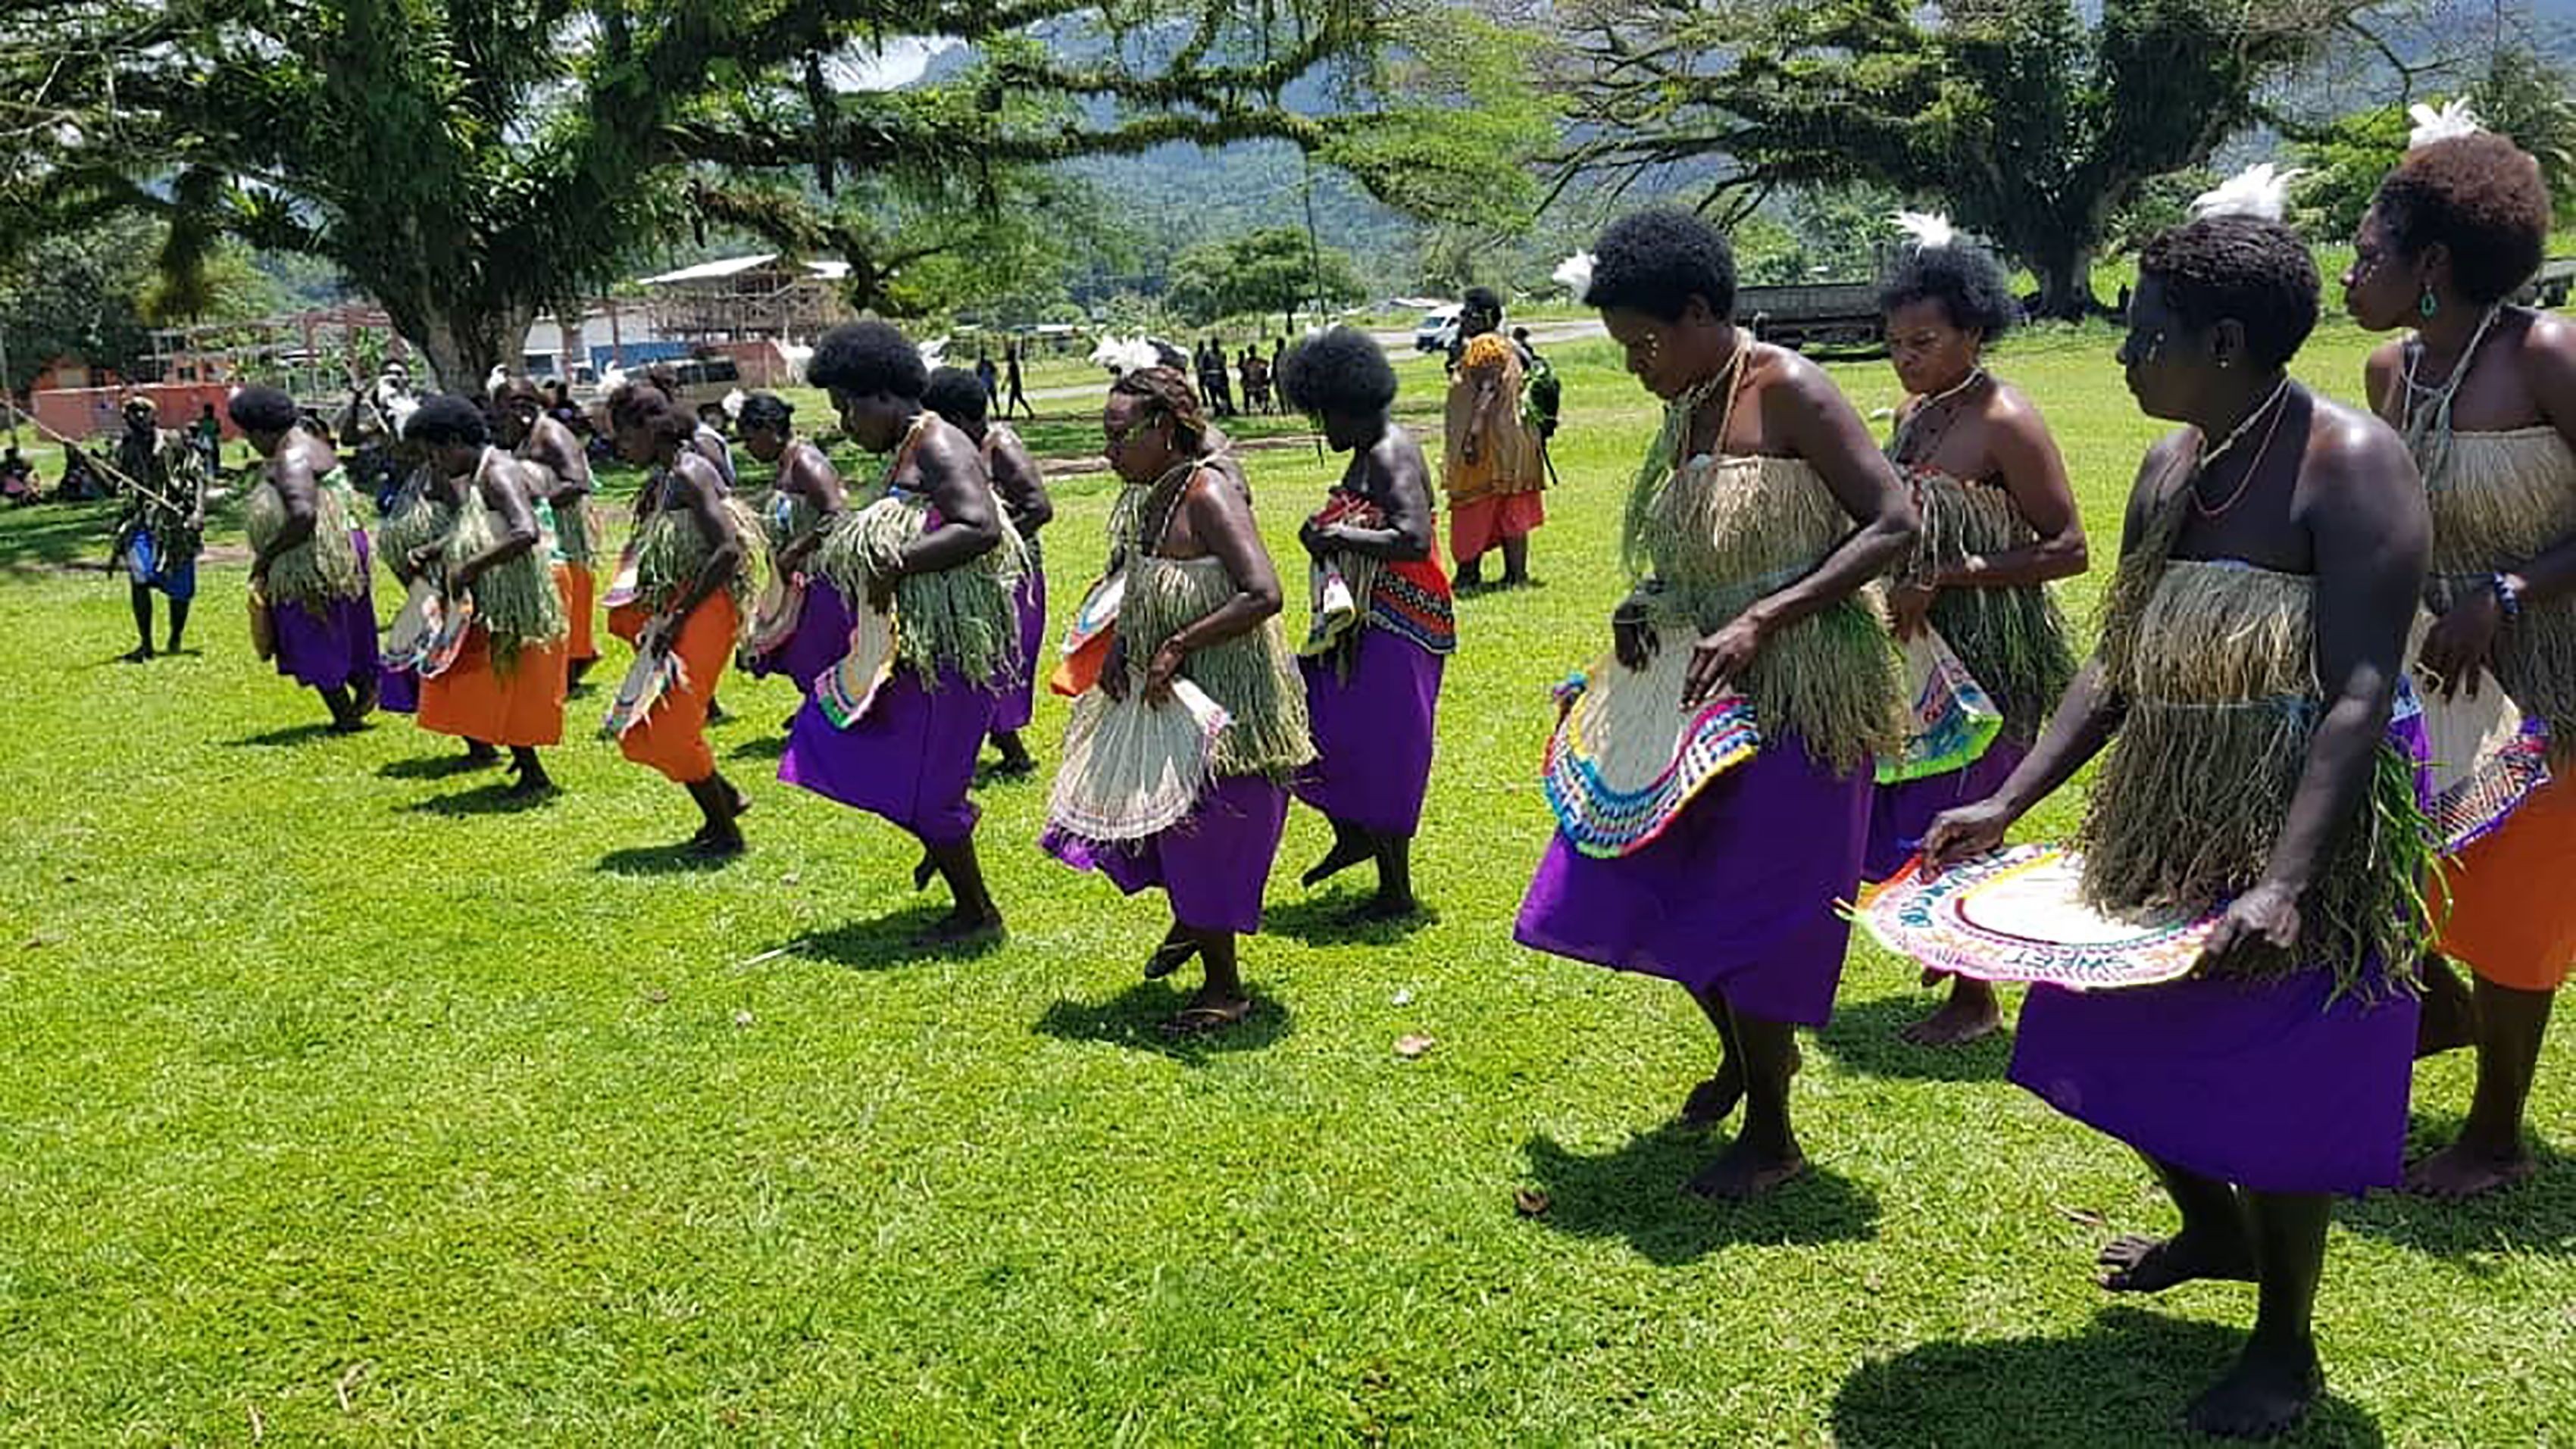 Ahead of Bougainville’s landmark independence vote, women dance at a November 6 reconciliation ceremony that brought together former enemies in a decade-long civil war. Photo: AFP